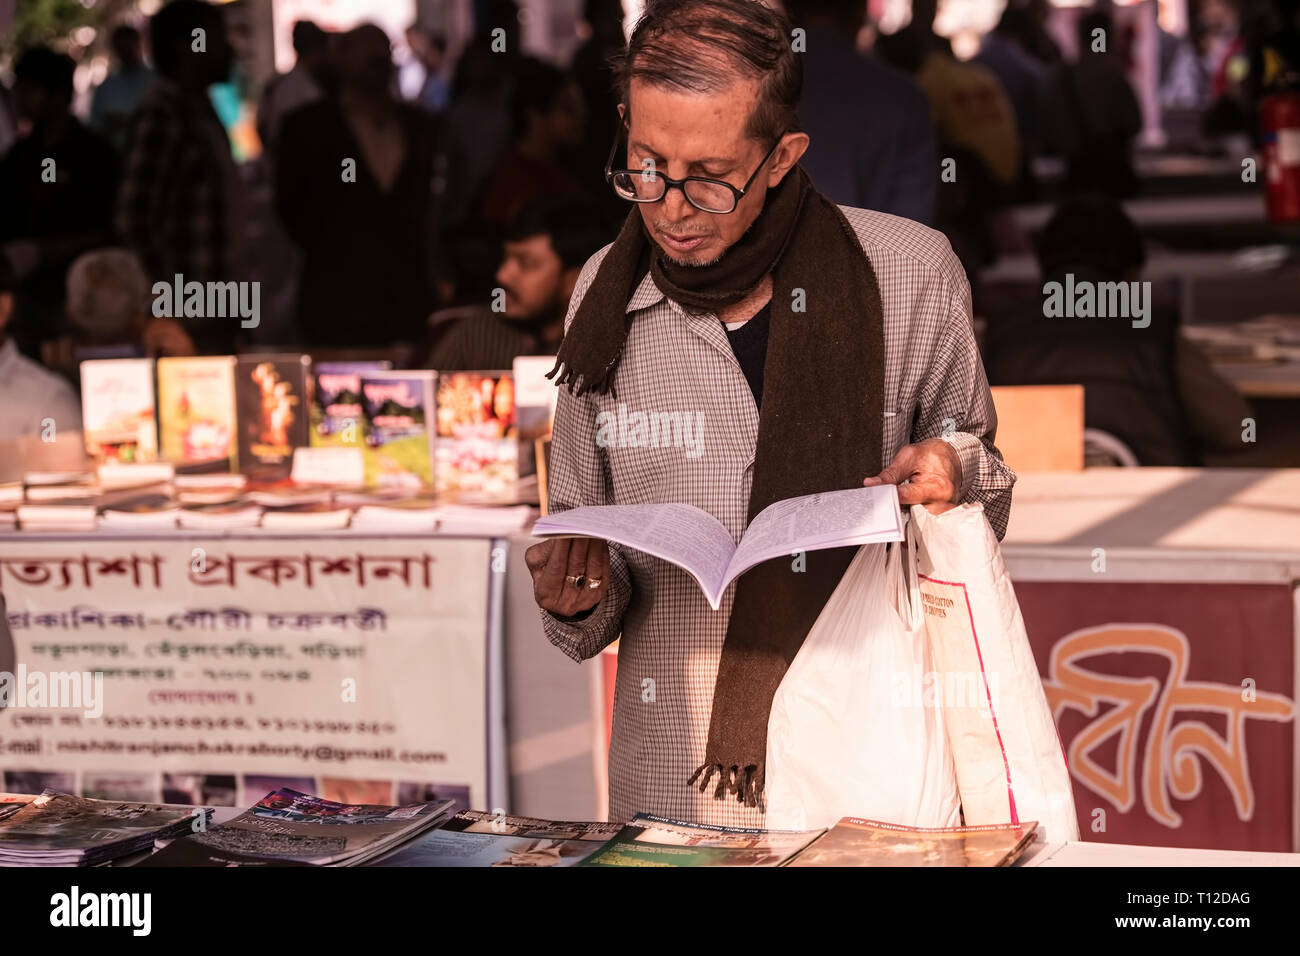 Kolkata,book,Fair,a mid-age,male book reader,reading,in,winter,afternoon,light, book,magzine stalls,in the ,background,Kolkata,India. Stock Photo